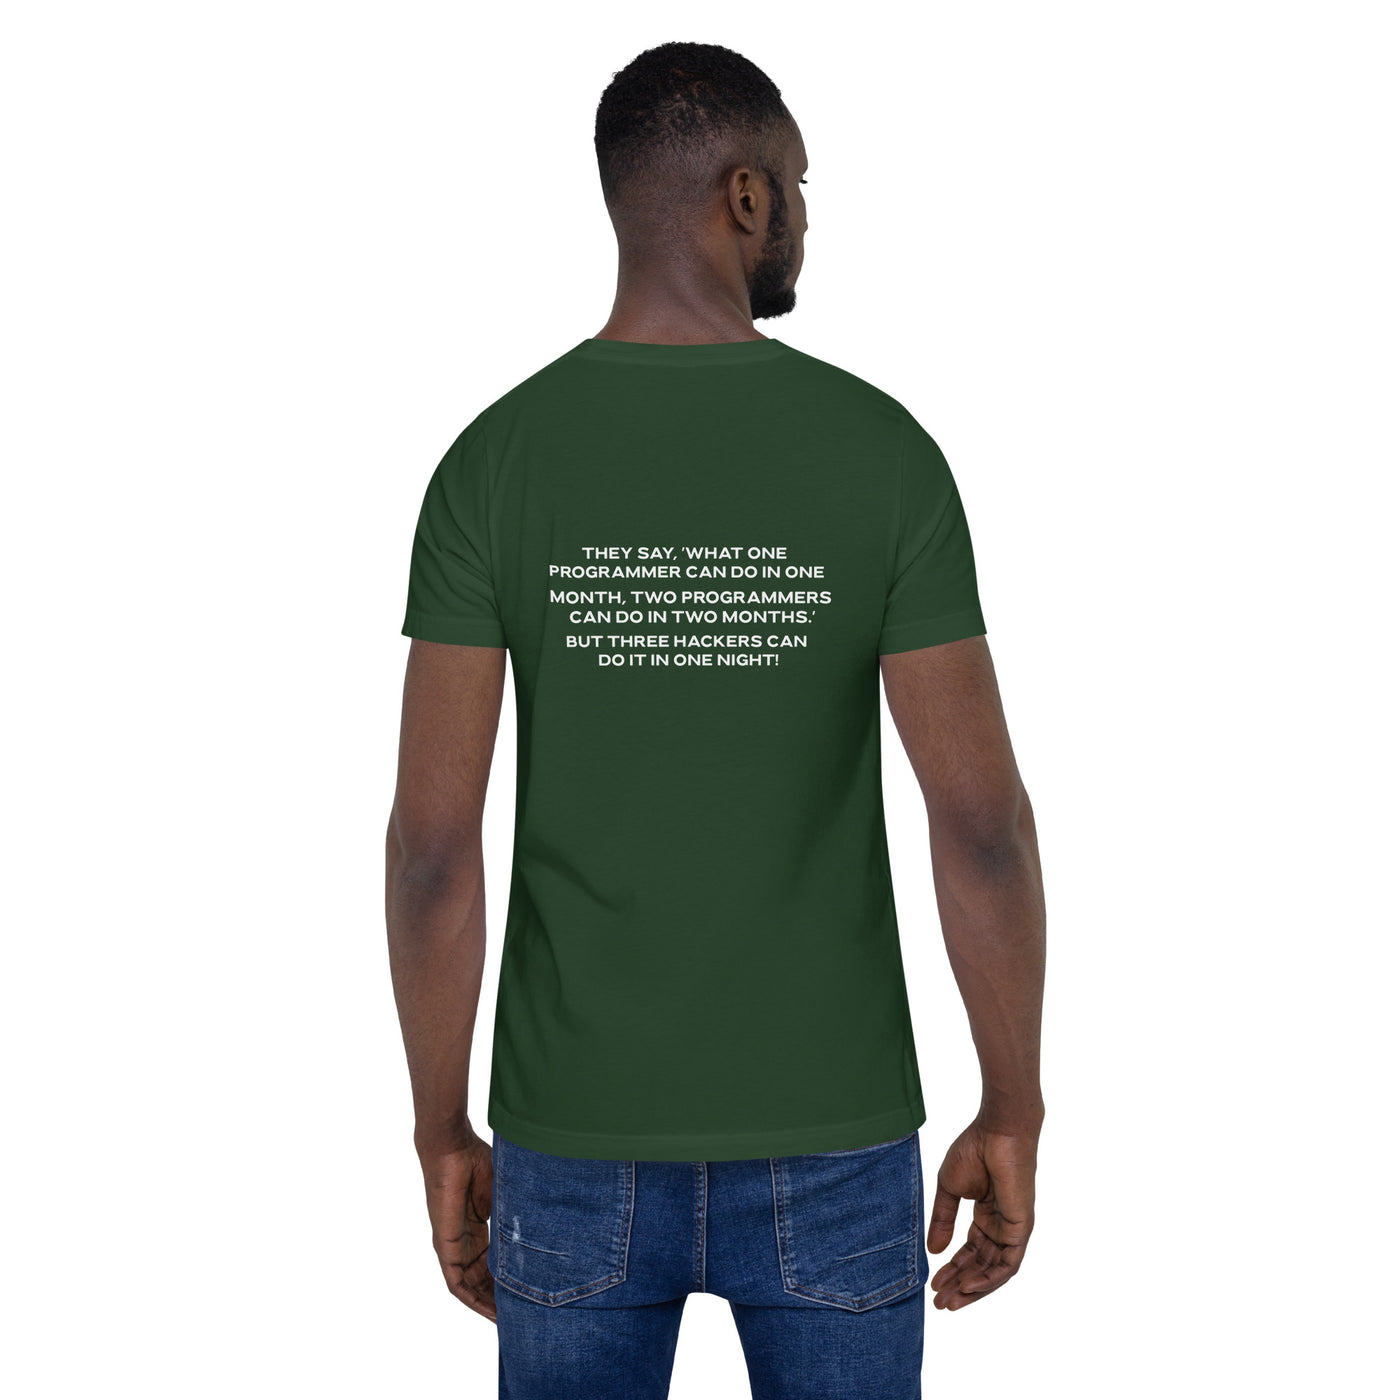 They say, what one programmer can do in one month V2 - Unisex t-shirt ( Back Print)